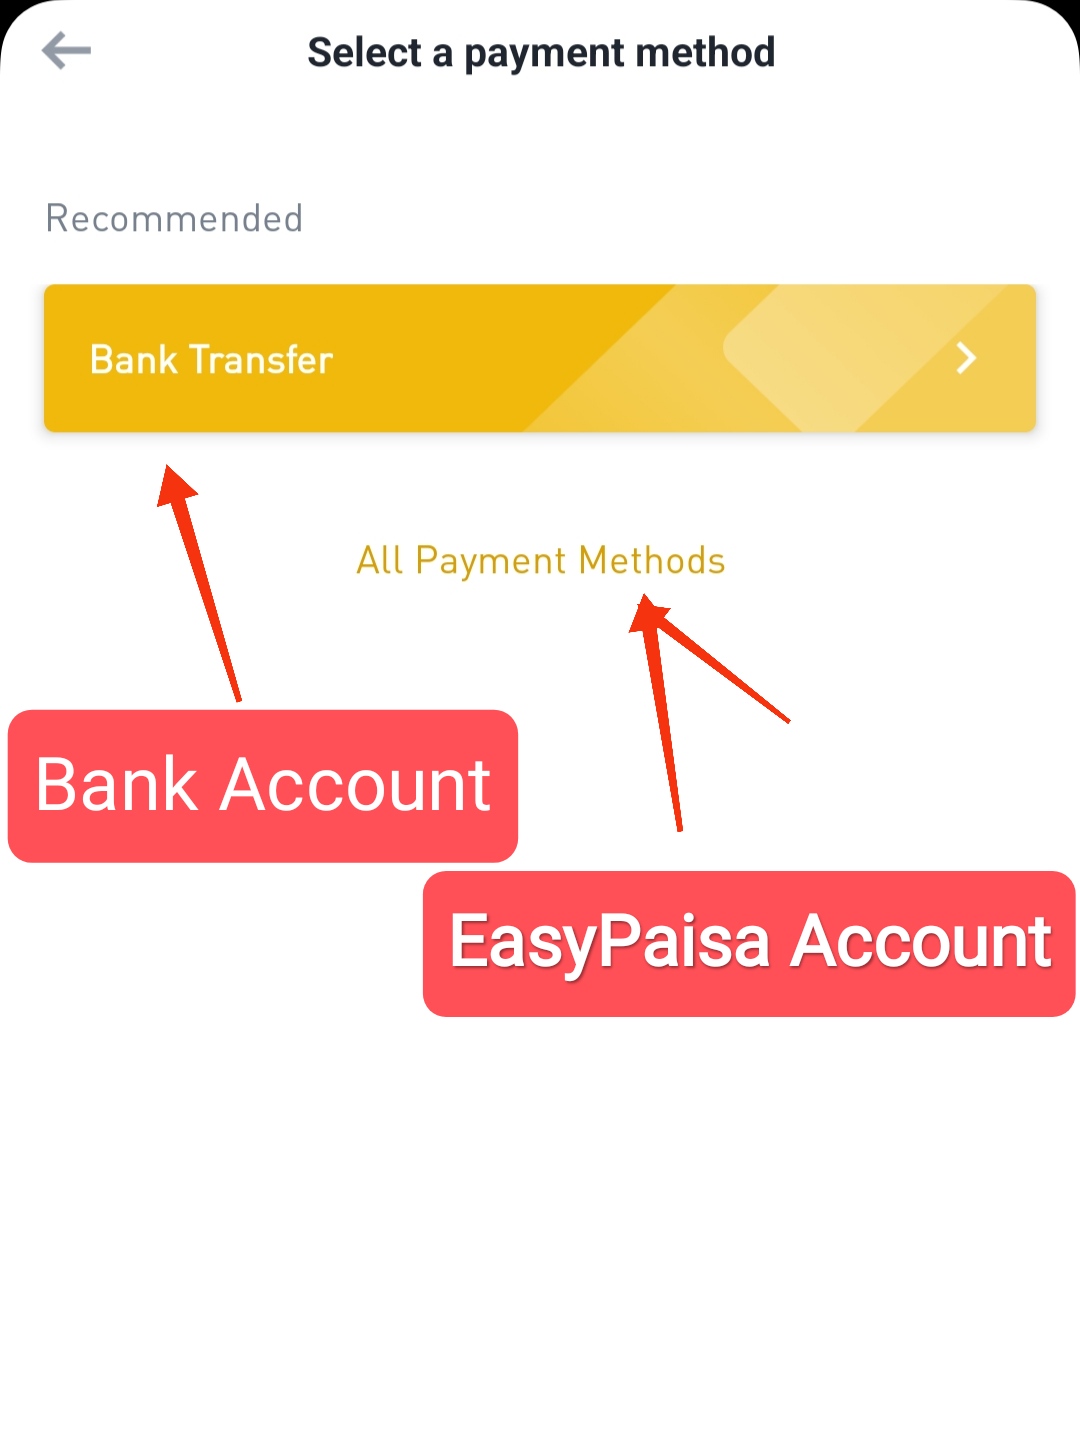 After that in the next window you will be shown two options. The first is "Bank Transfer" which Binance itself recommends. Then below that there will be another option “All Payment Method” Full details are in below photo.